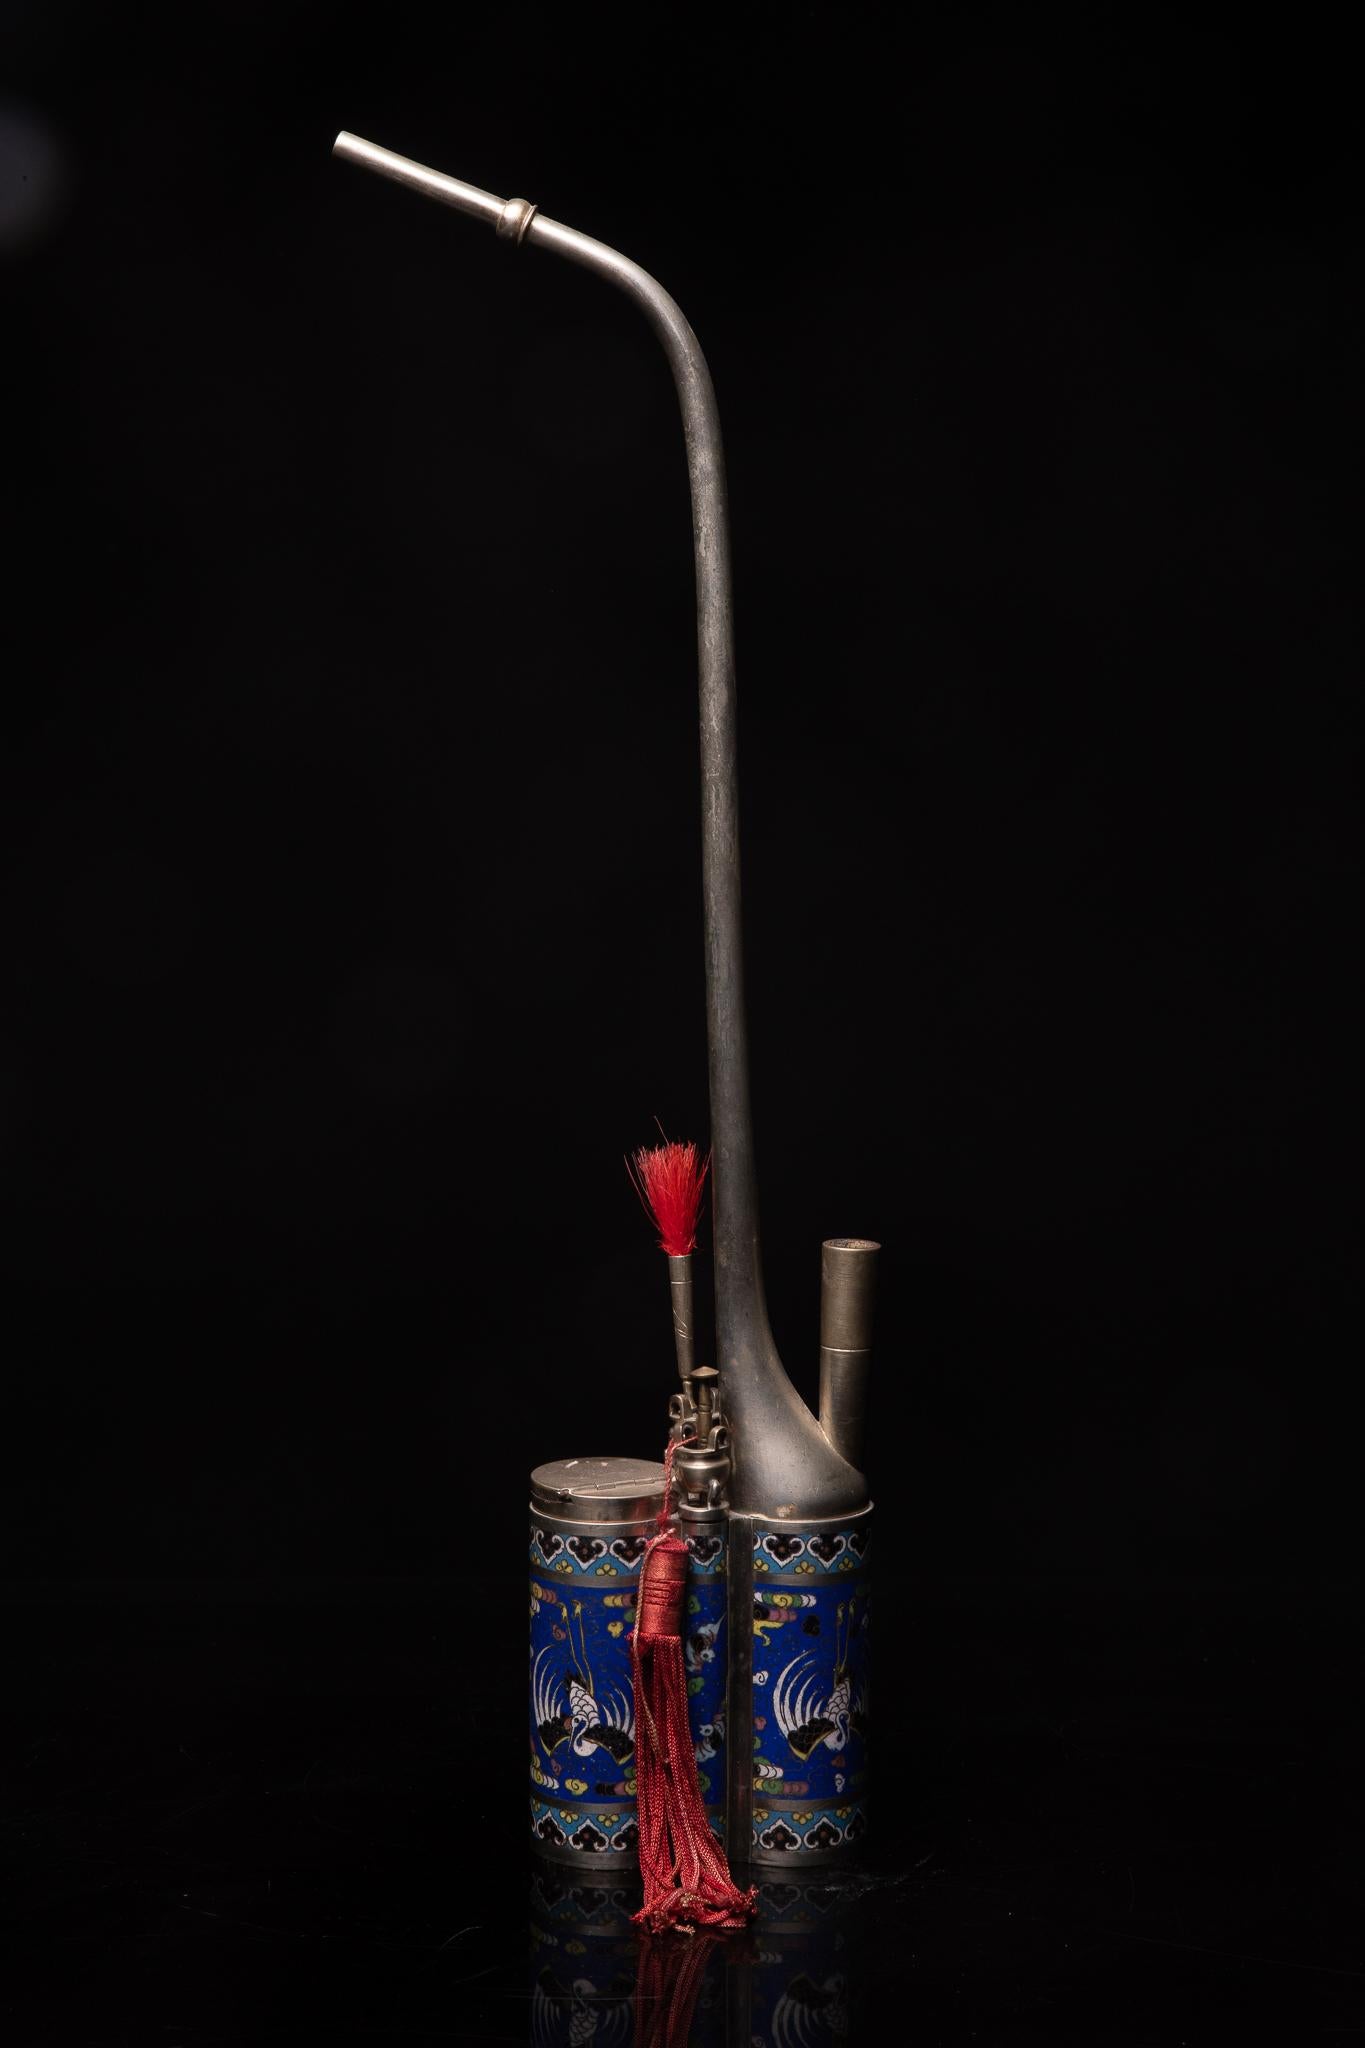 Nineteenth century Chinese water pipe in Paktong (= an Alloy of Zinc, Copper and Nickel). The Base - elaborated in Enamel Cloisonné - is decorated with a Phoenix on an Ultramarine Blue Background. The Accessory Holders have the Form of Incence